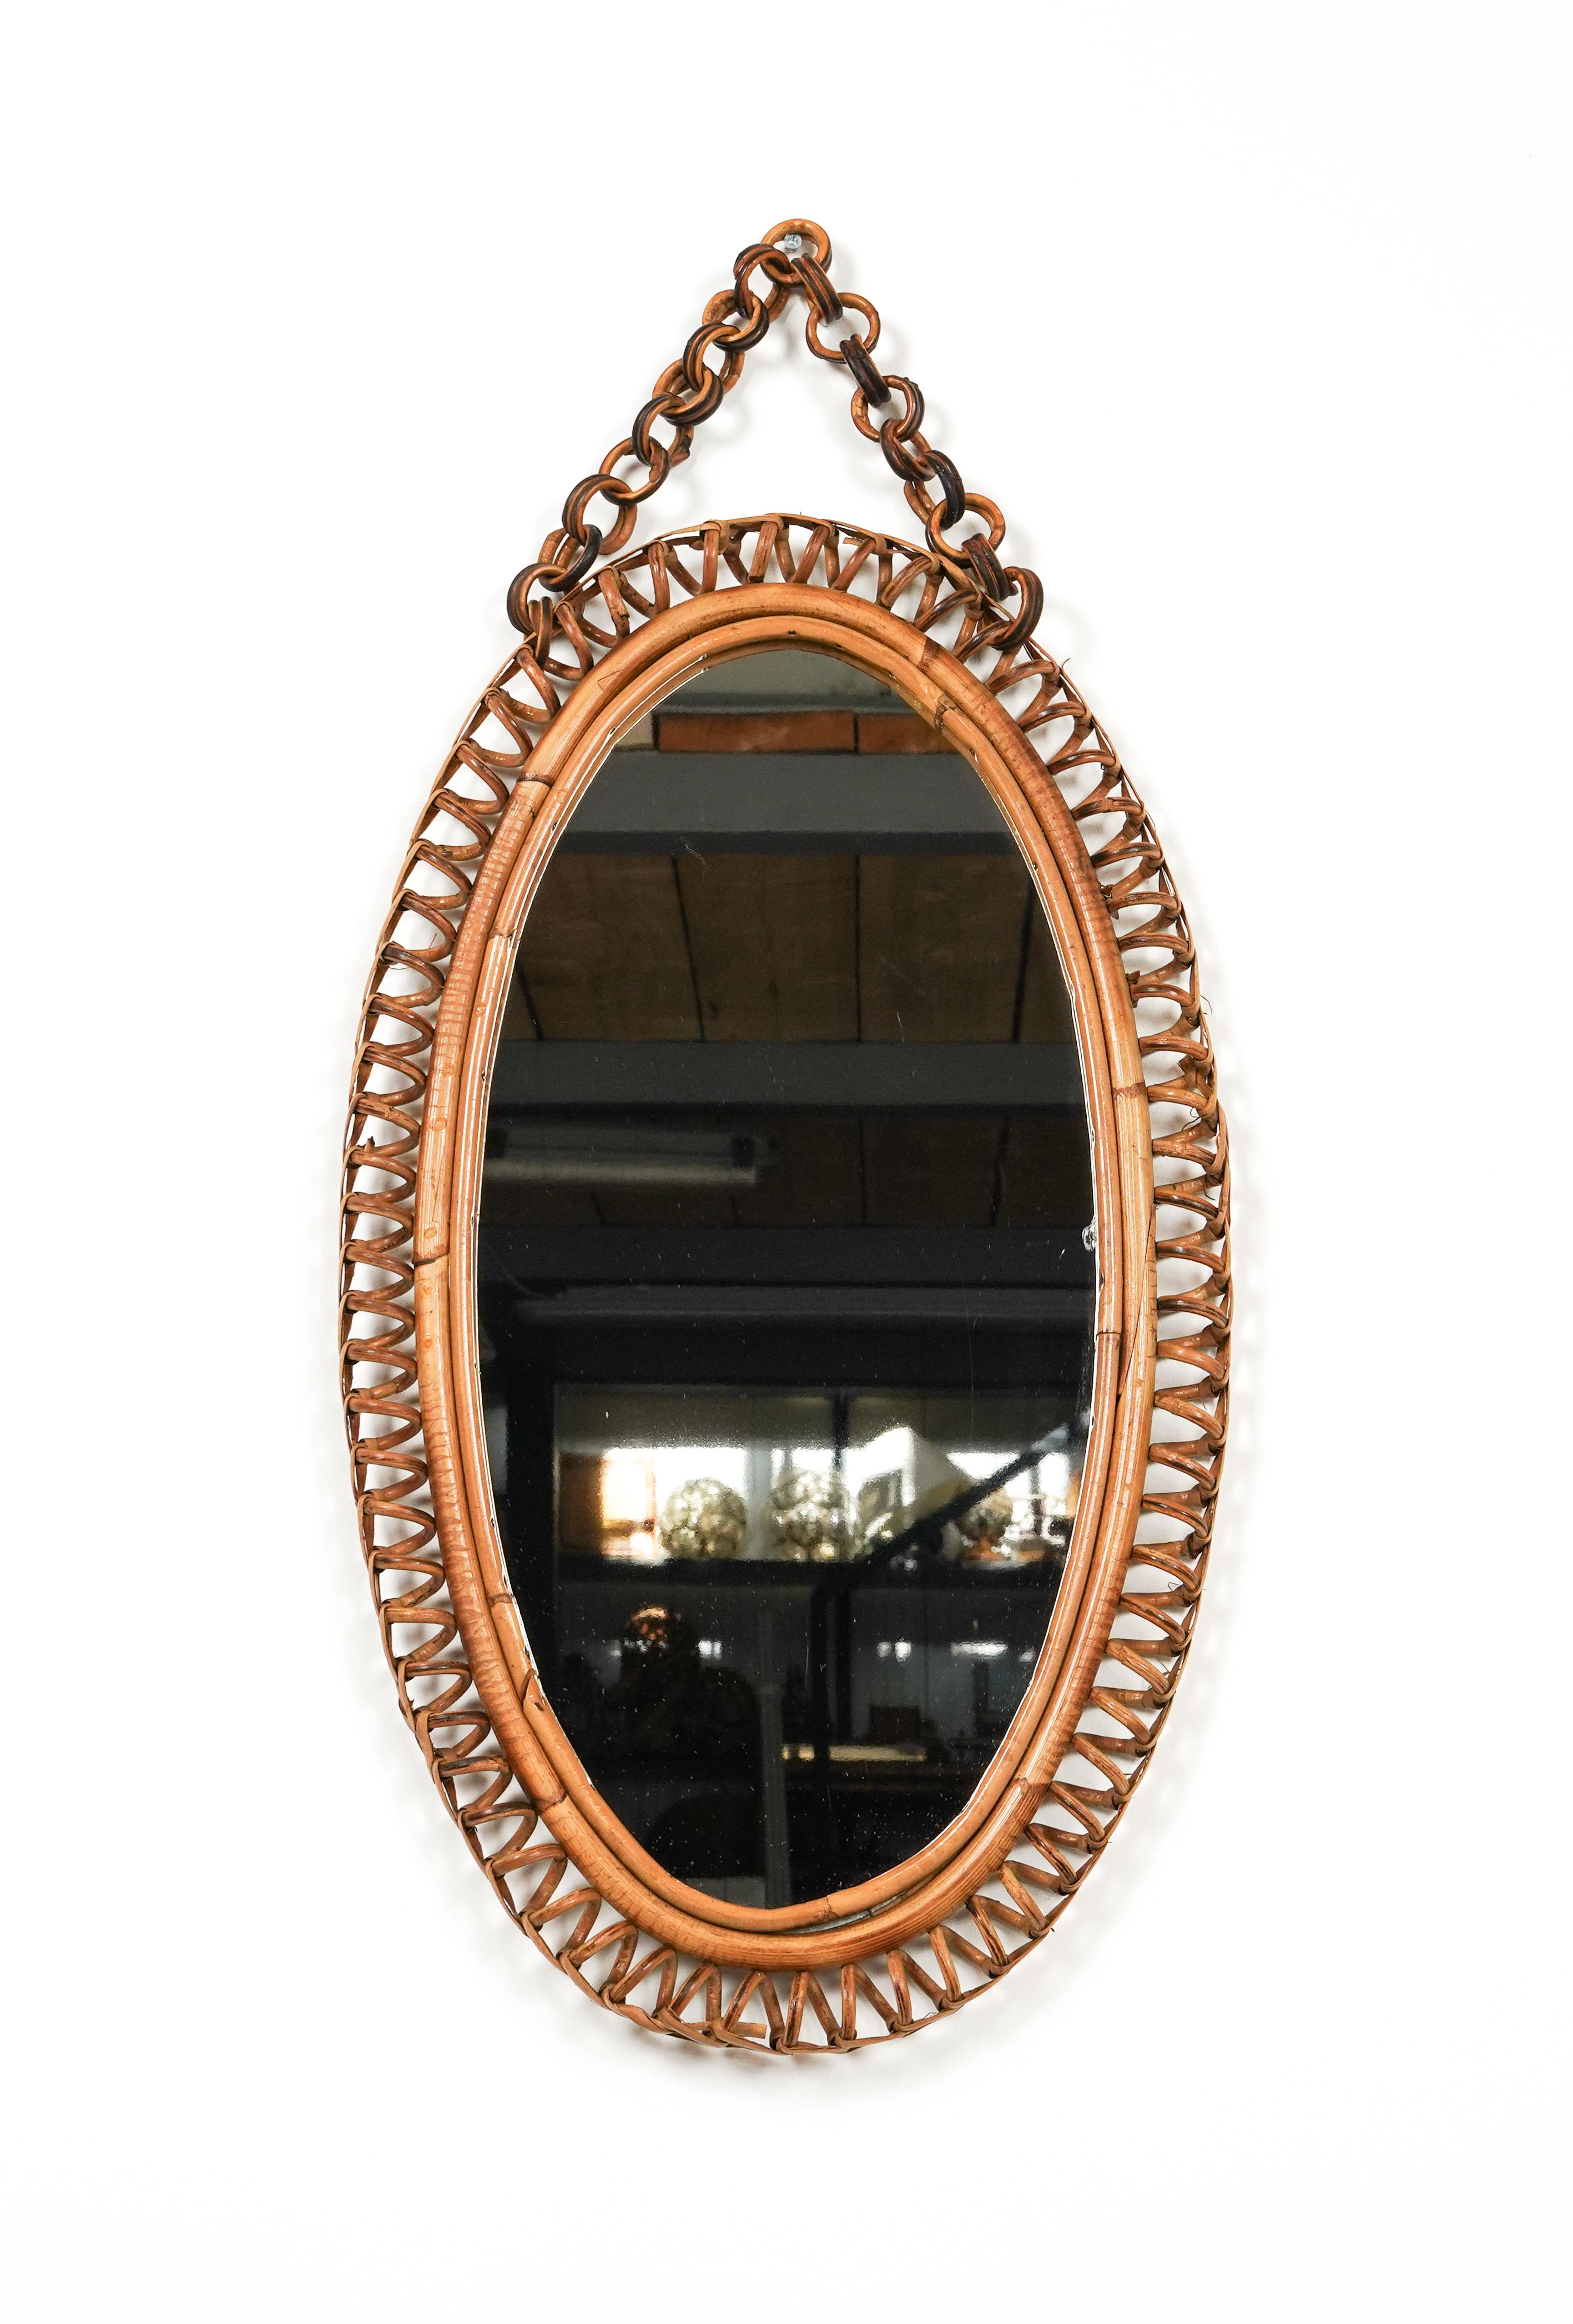 Midcentury beautiful oval wall mirror with chain in bamboo and rattan in the style of Italian design Franco Albini.

Made in Italy in the 1960s.

A highly decorative mirror.

Dimensions without chain:
Height 70 cm.
Width 40cm.
Depth 3cm.